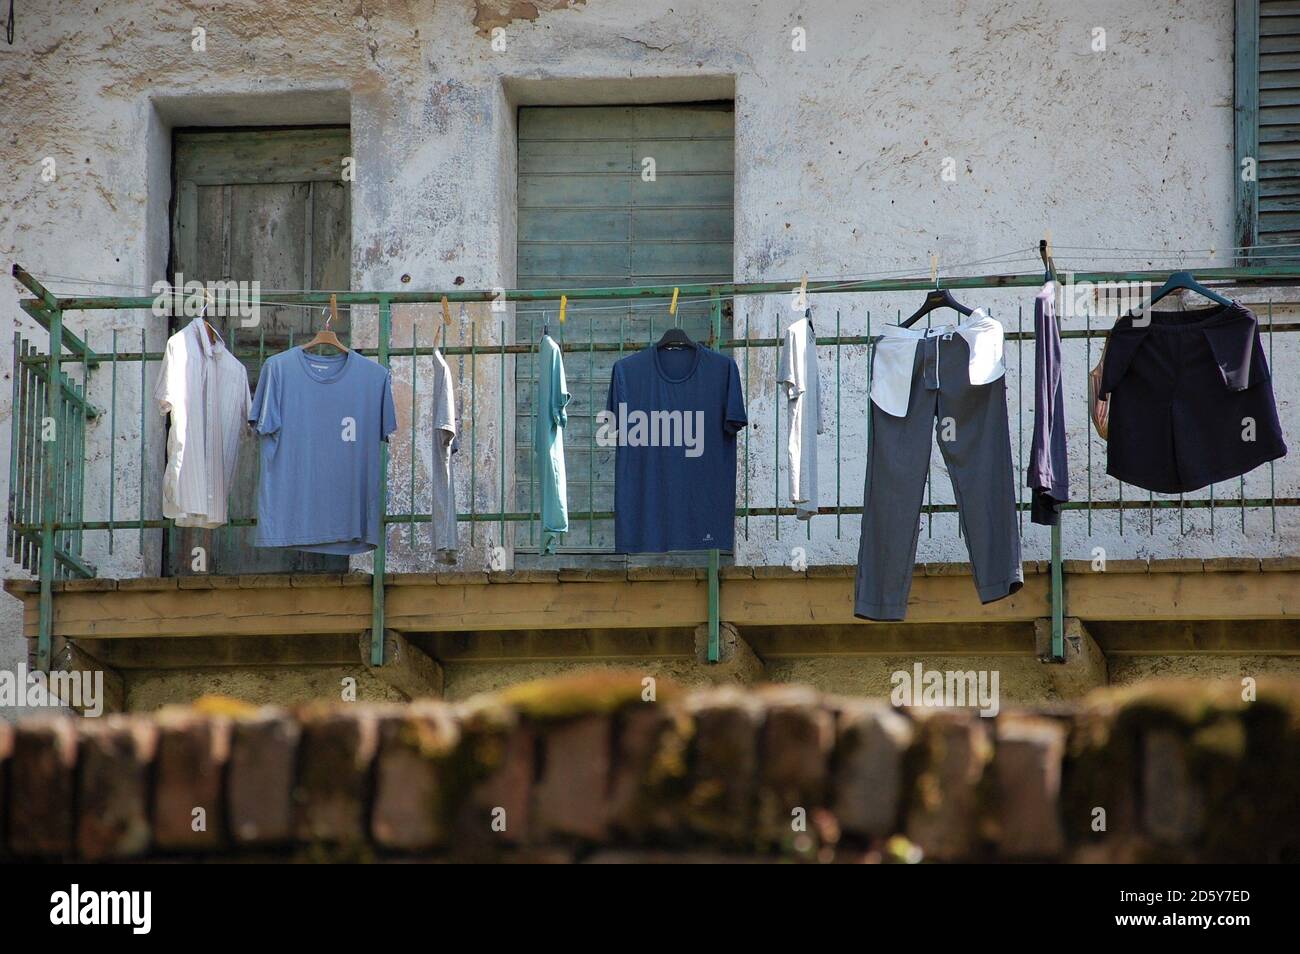 shades of blue clothes drying in the sun hanged on wire in foreground and old house facade in background in Italy Stock Photo